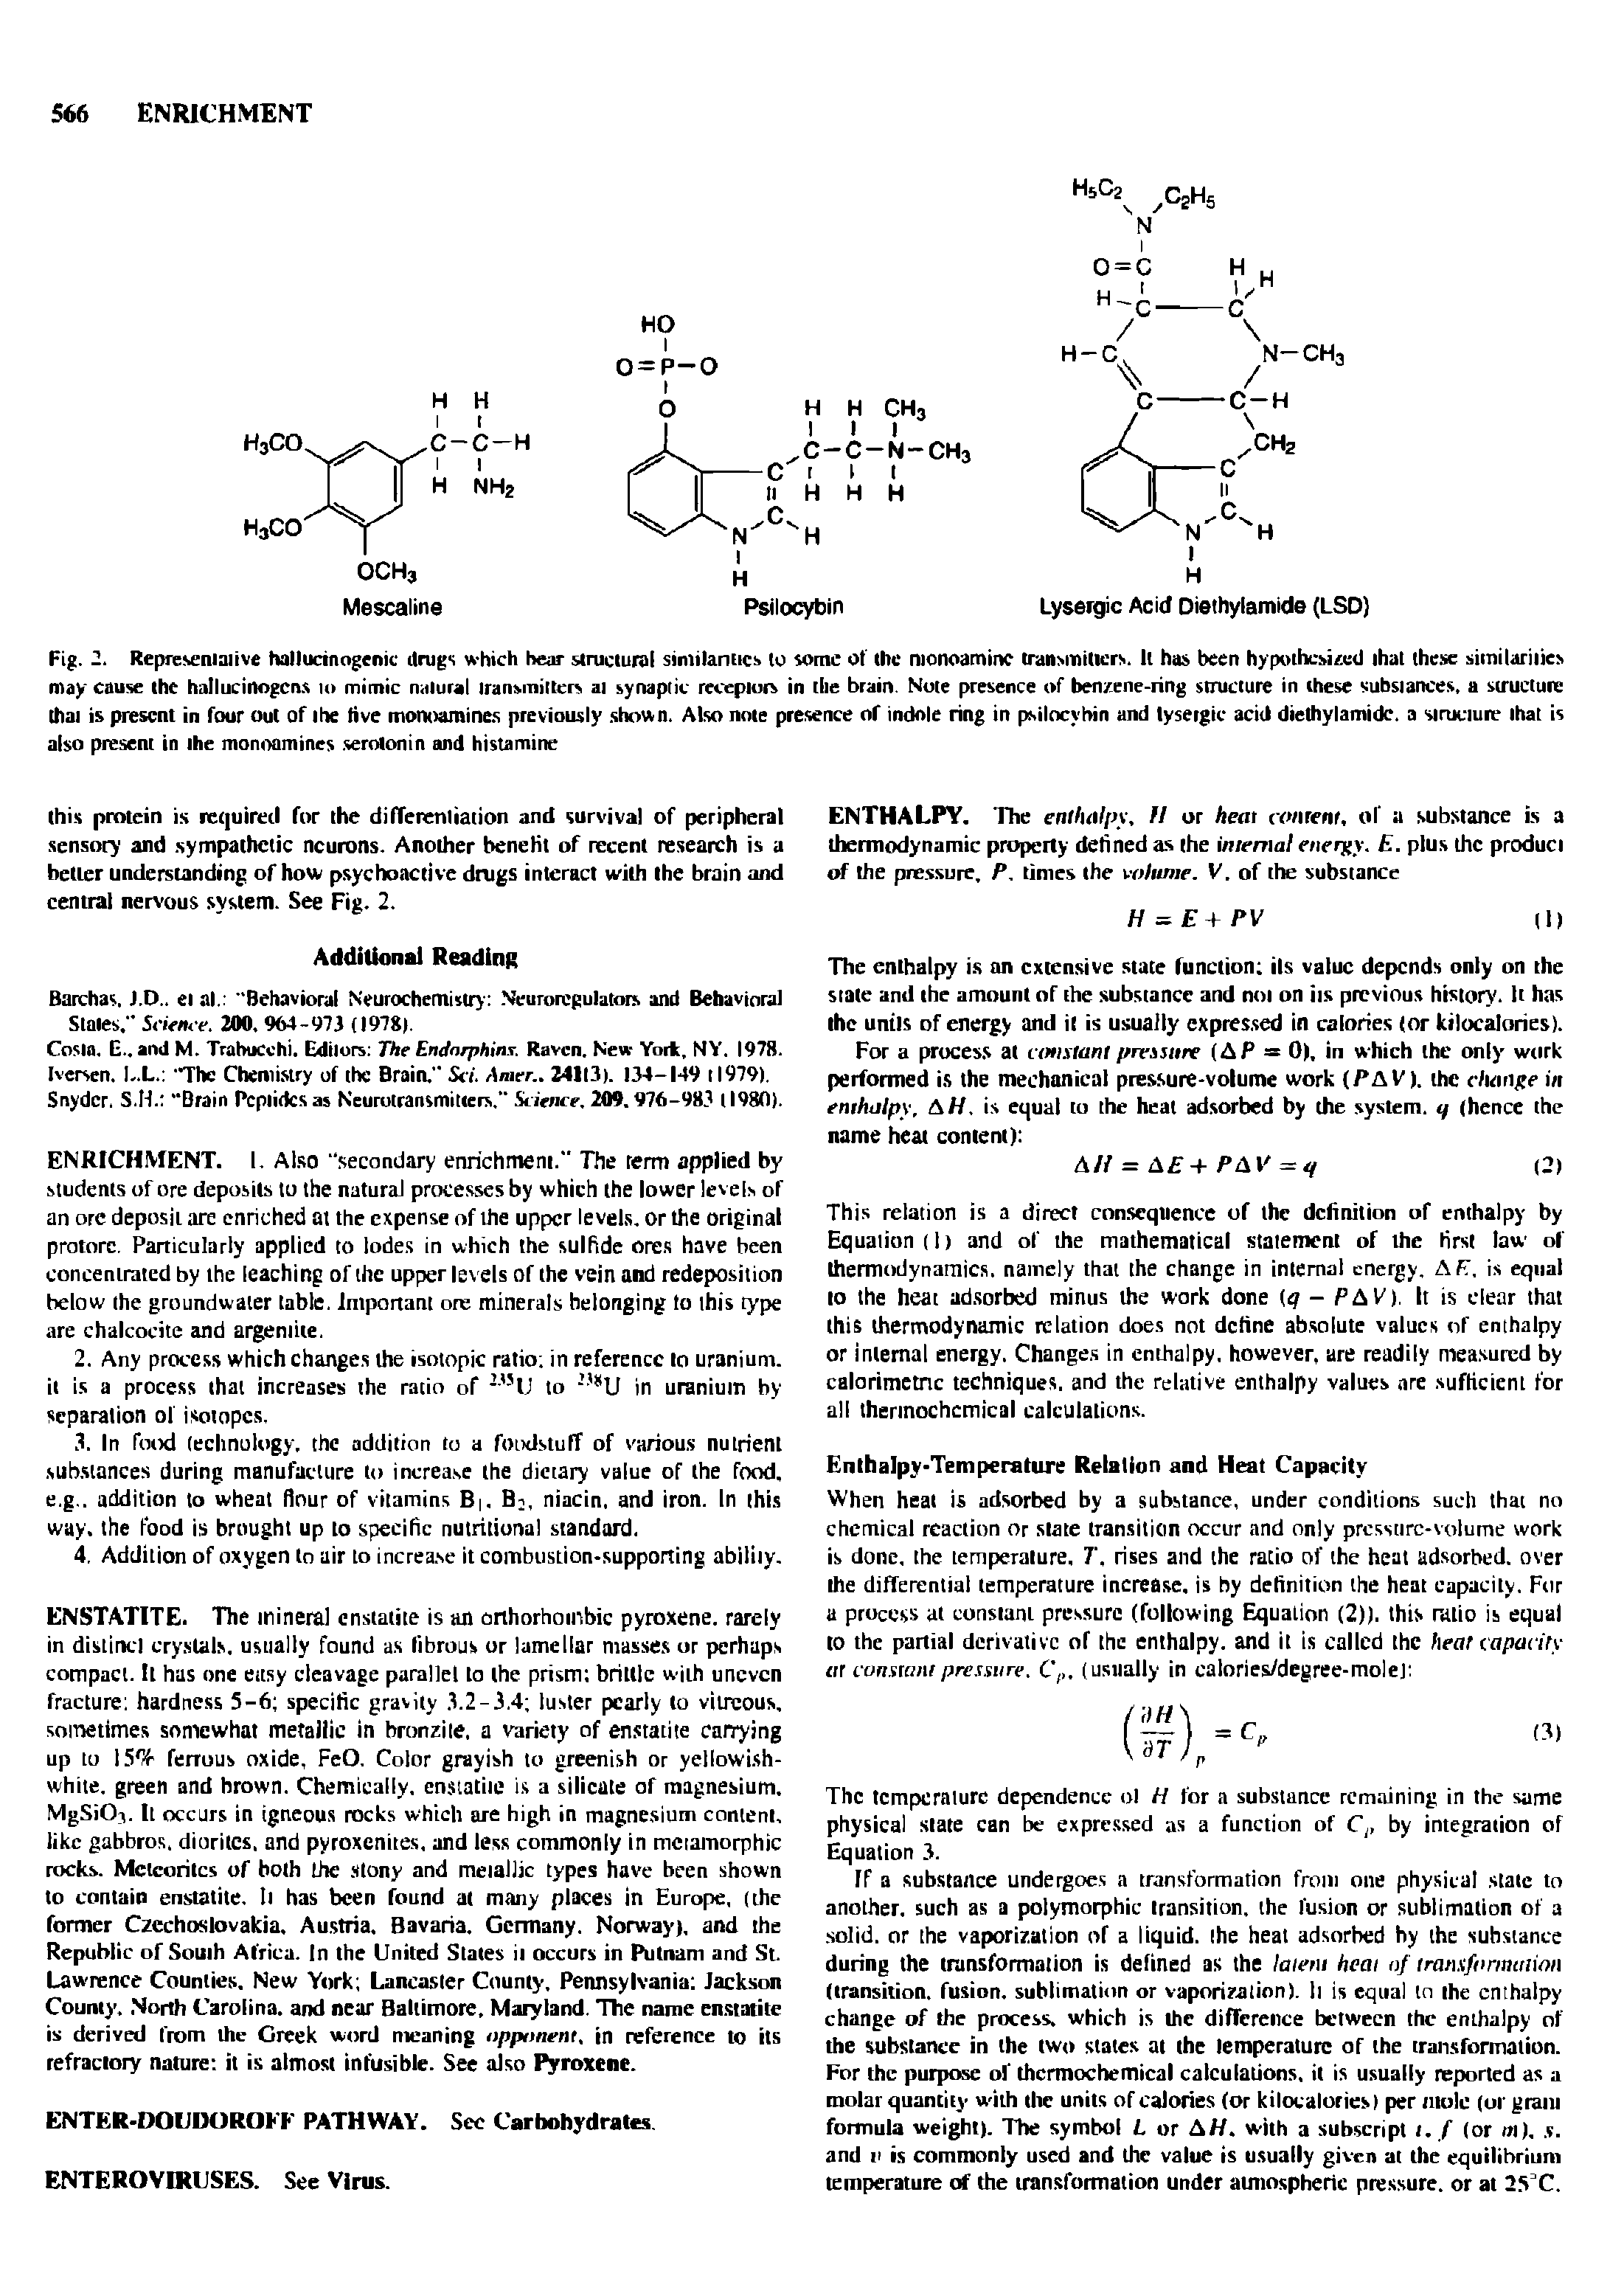 Fig. 2. Representative hallucinogenic drugs which hear structural similarities to some of the monoamine transmitters. It has been hypothesized that these similarities may cause the hallucinogens 10 mimic natural transmitters at synaptic receptors in the brain. Note presence of benzene-ring structure in these substances, a structure that is present in four out of the live monoamines previously shown. Also note presence of indole ring in psilocybin and lyseigic acid diethylamide, a structure that is also present in the monoamines serotonin and histamine...